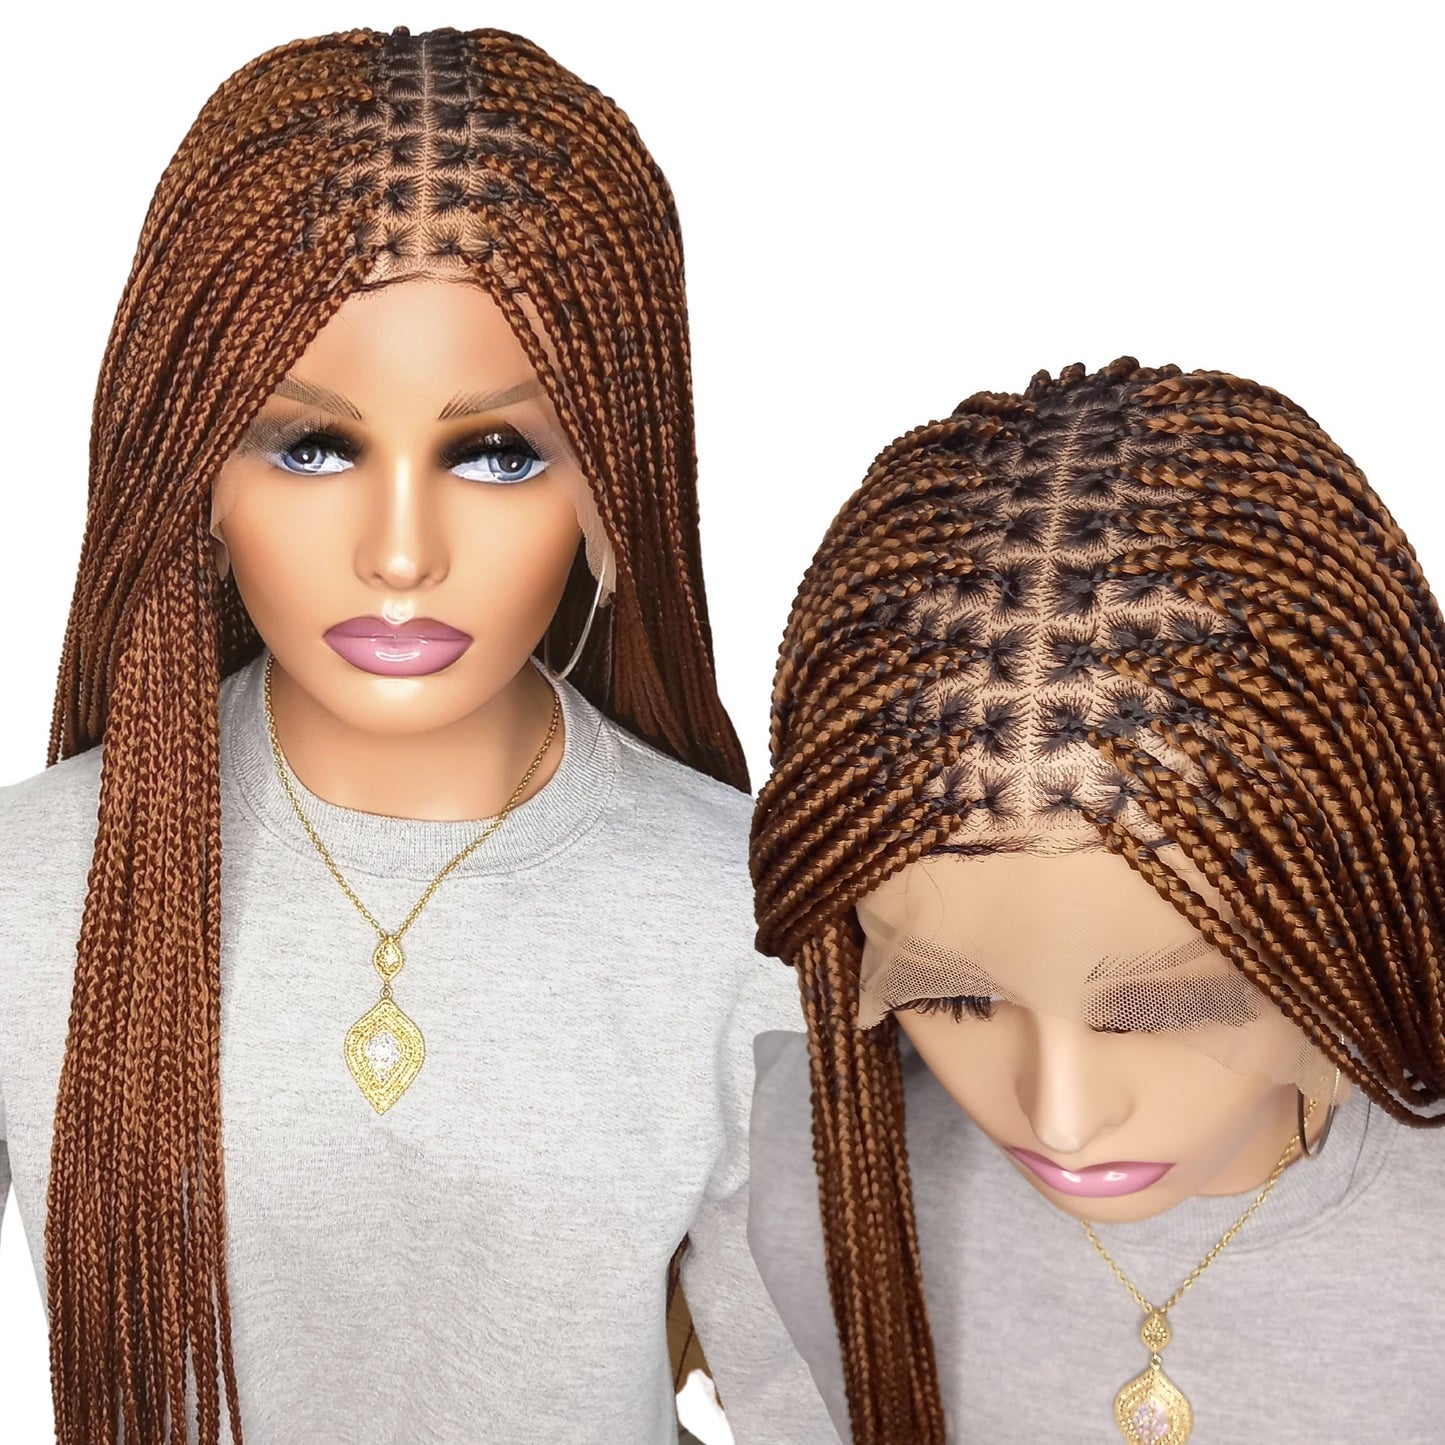 Knotless Auburn Braids Wig with 13X6 Lace Front and Baby Hair for Black Women, 30 inches, braided wigs for black women also in other colors